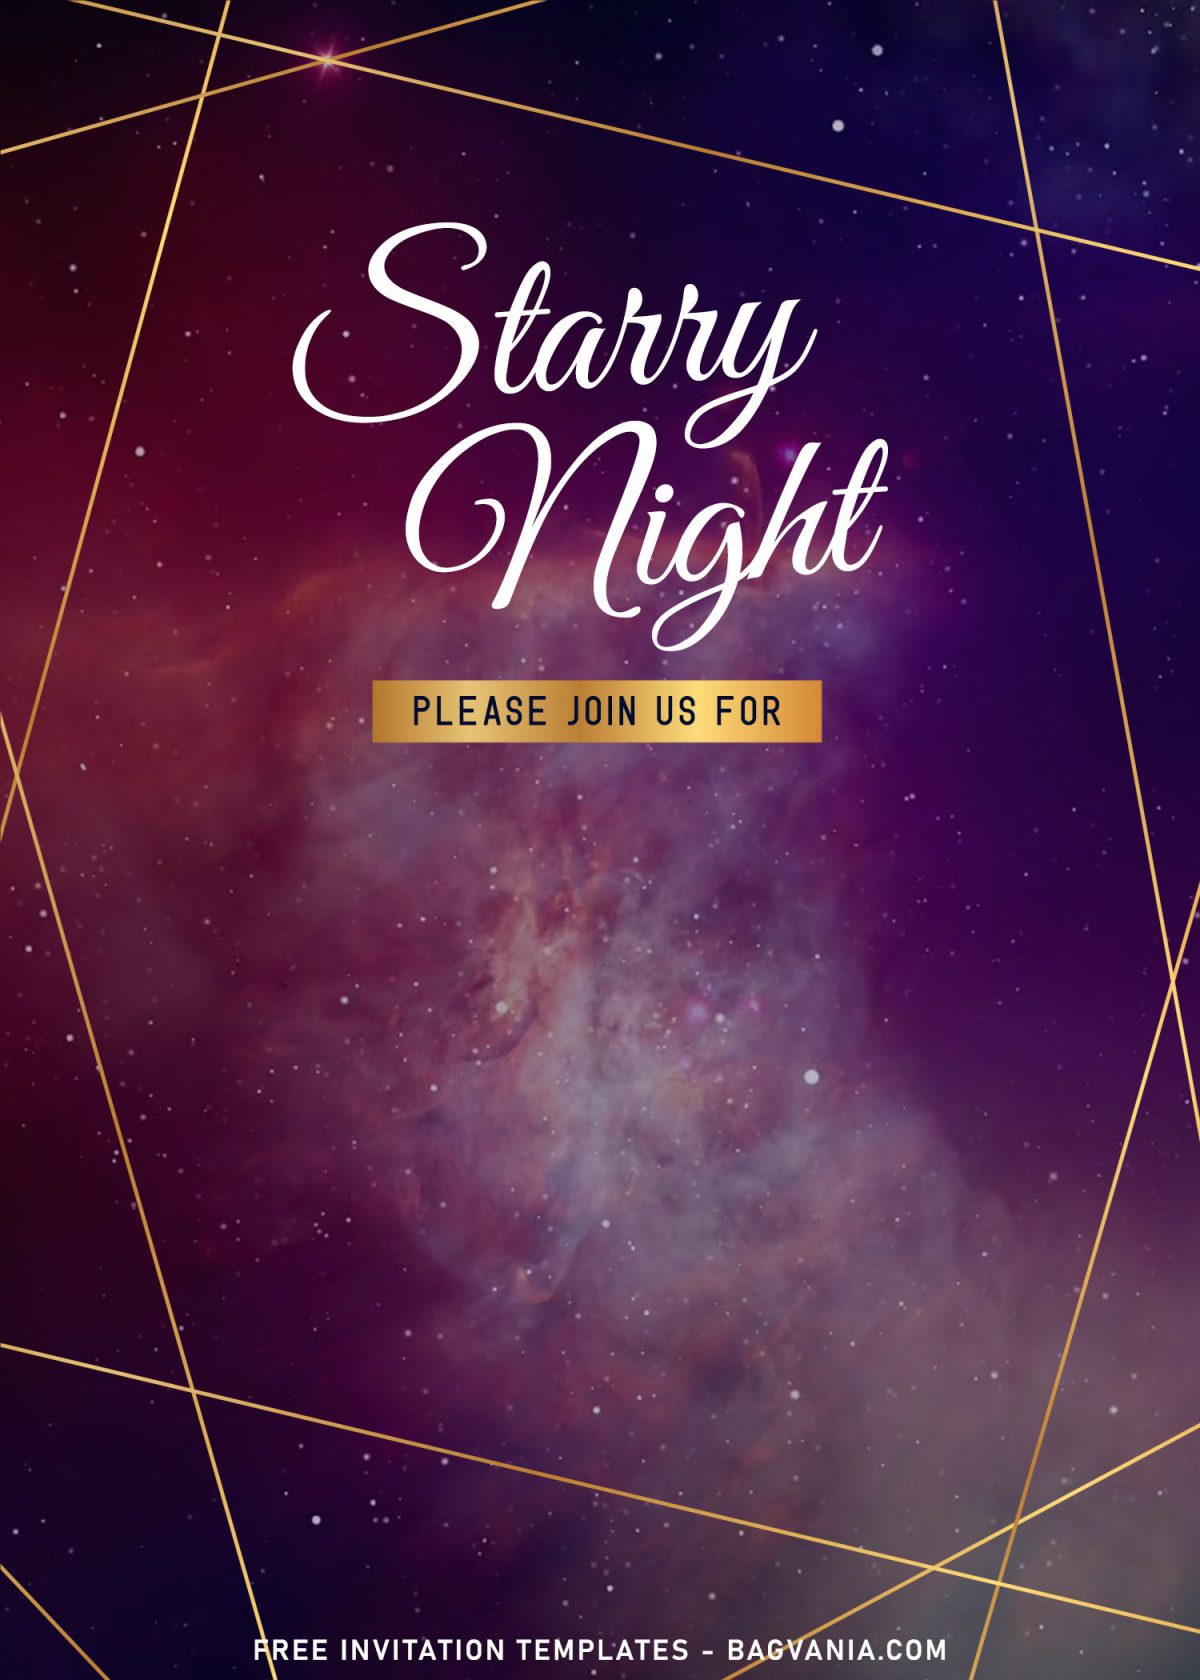 8+ Sparkling Starry Night Birthday Invitation Templates and has Star Dust background